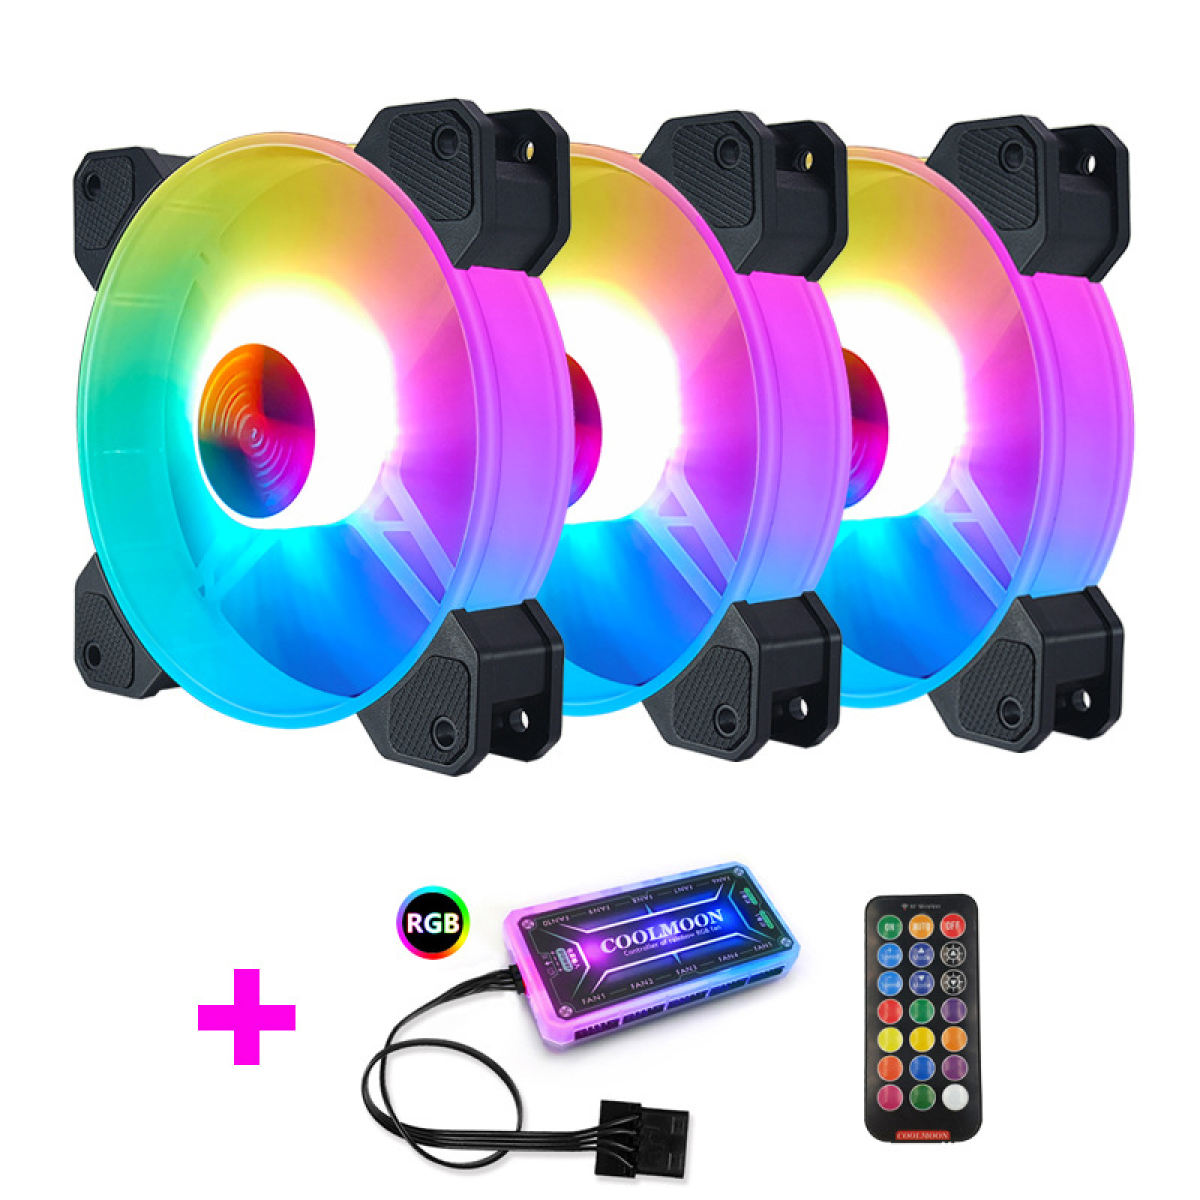 COOLMOON 3x RGB Fan with Controller & Remote (Set 1)